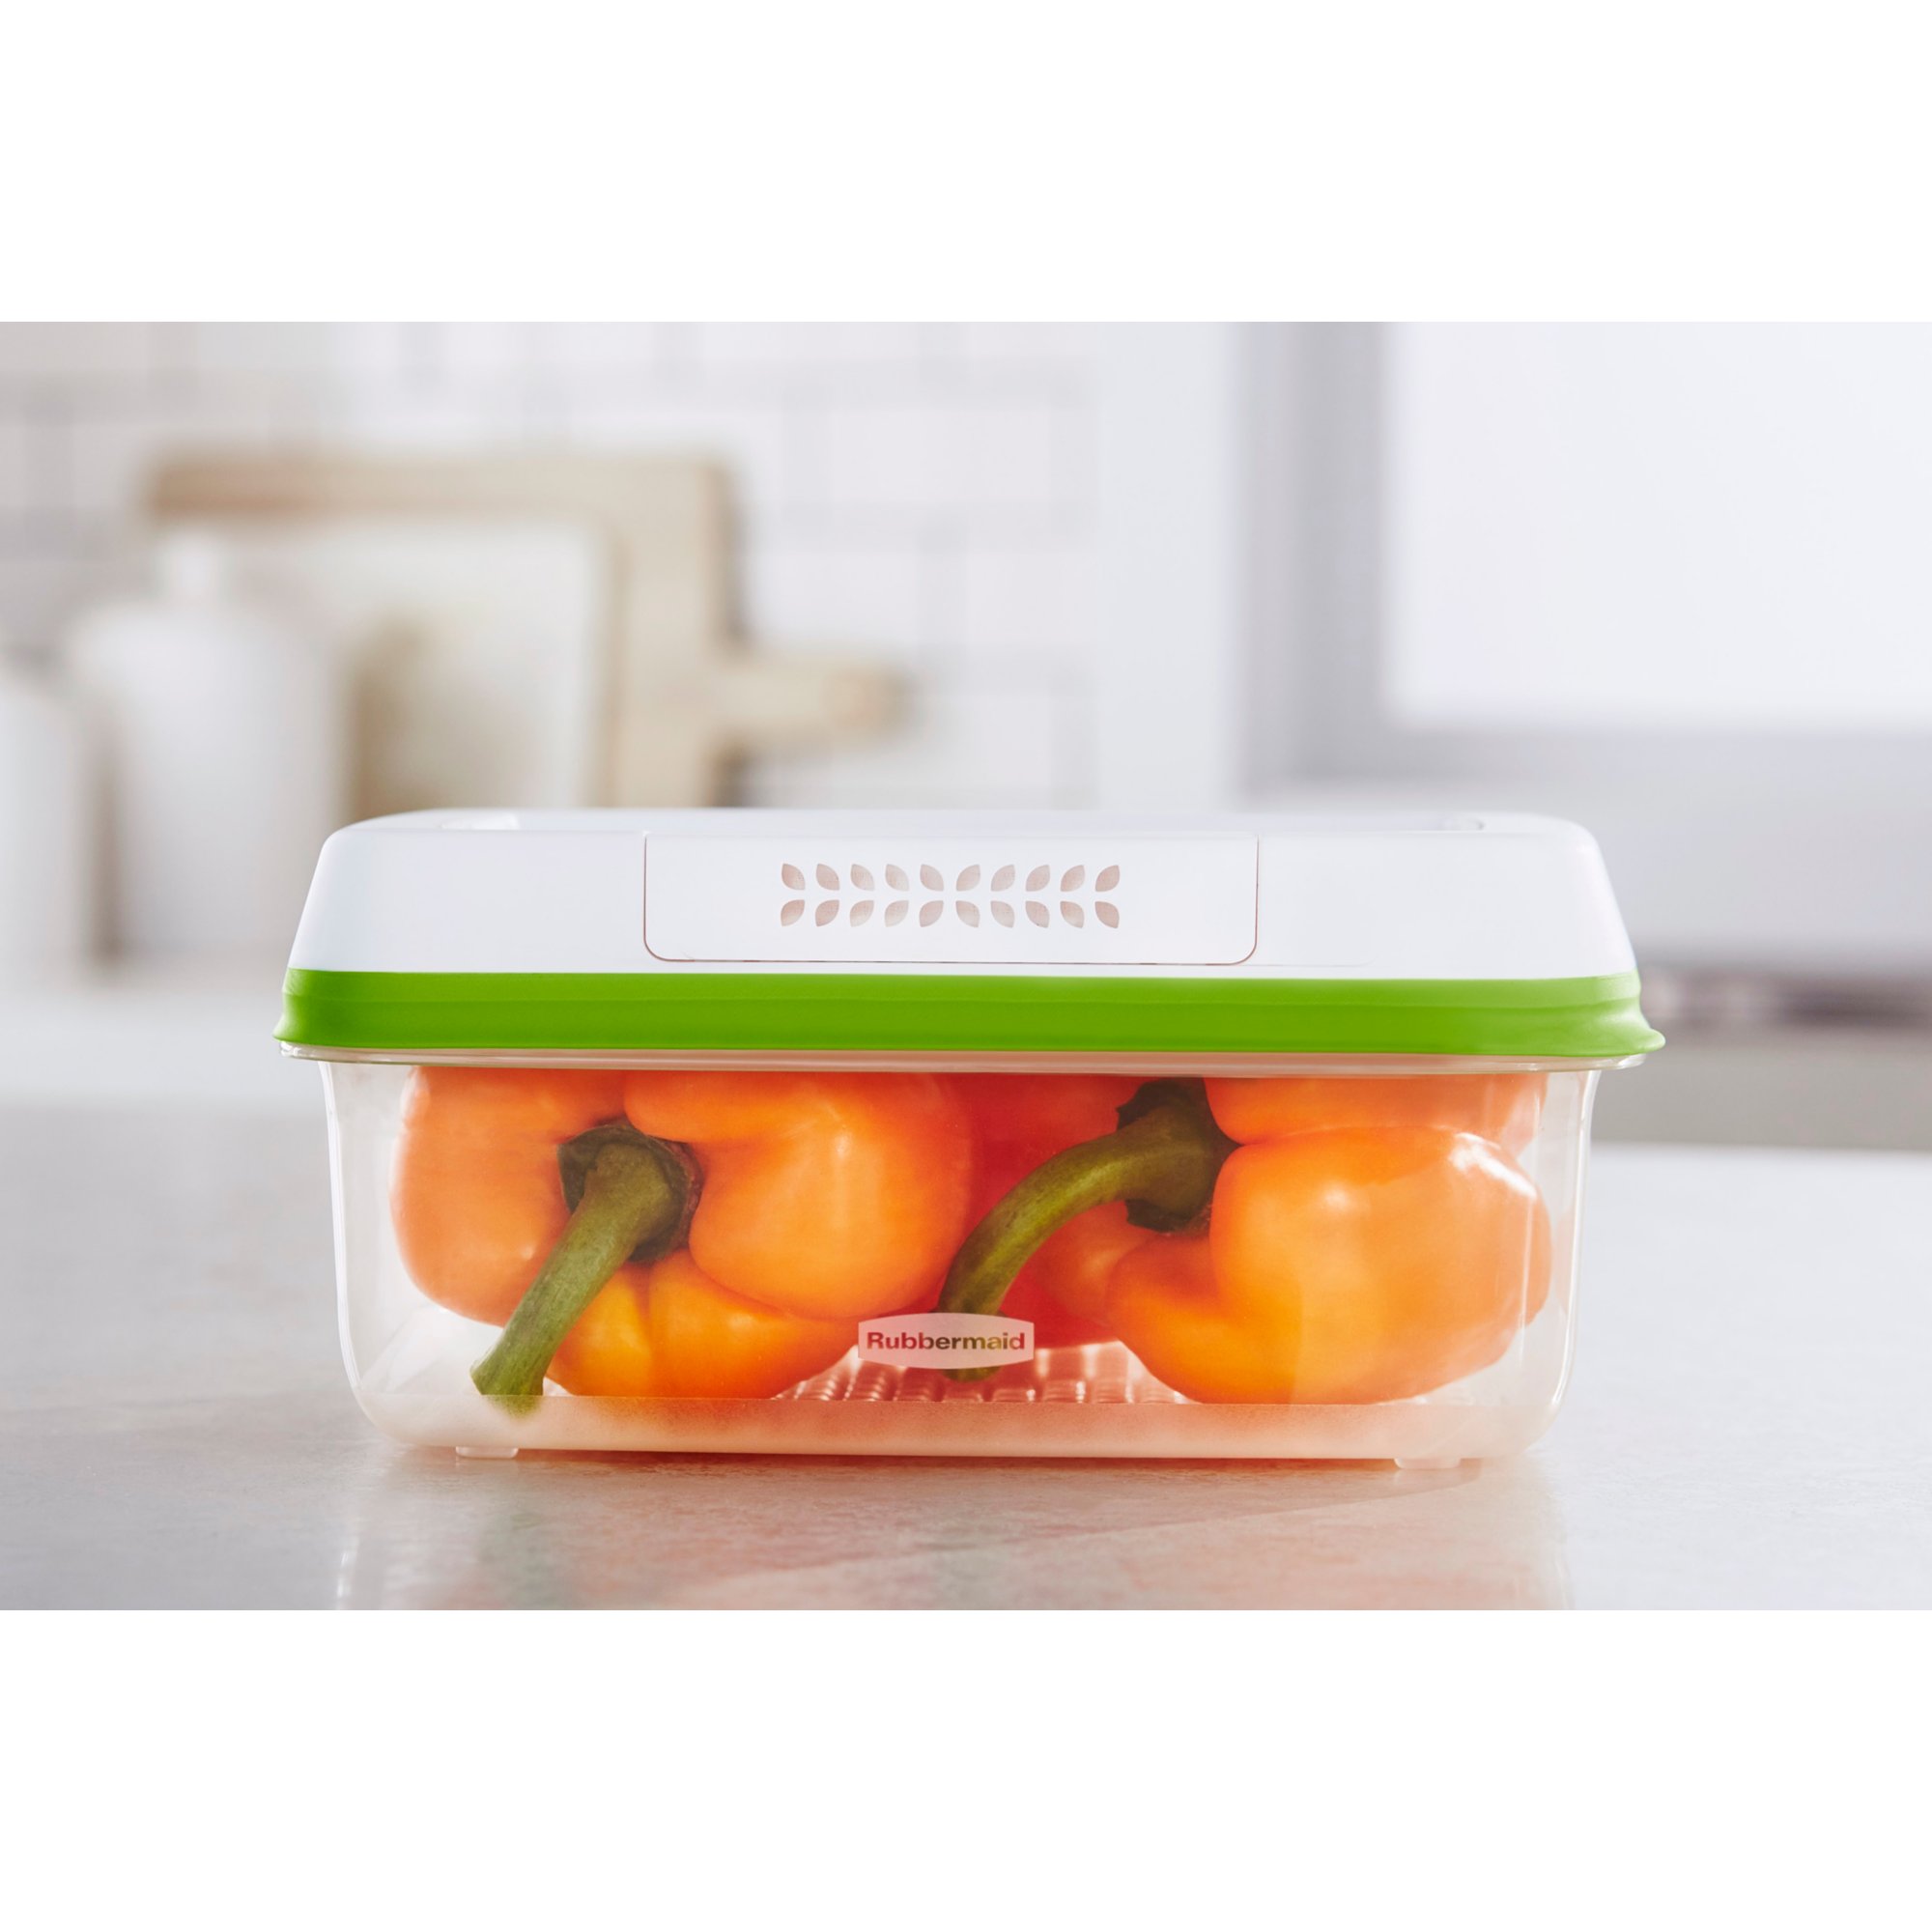 https://s7d9.scene7.com/is/image/NewellRubbermaid/2114816-rubbermaid-food-storage-green-11.3c-large-short-with-food-straight-on-lifestyle?wid=2000&hei=2000